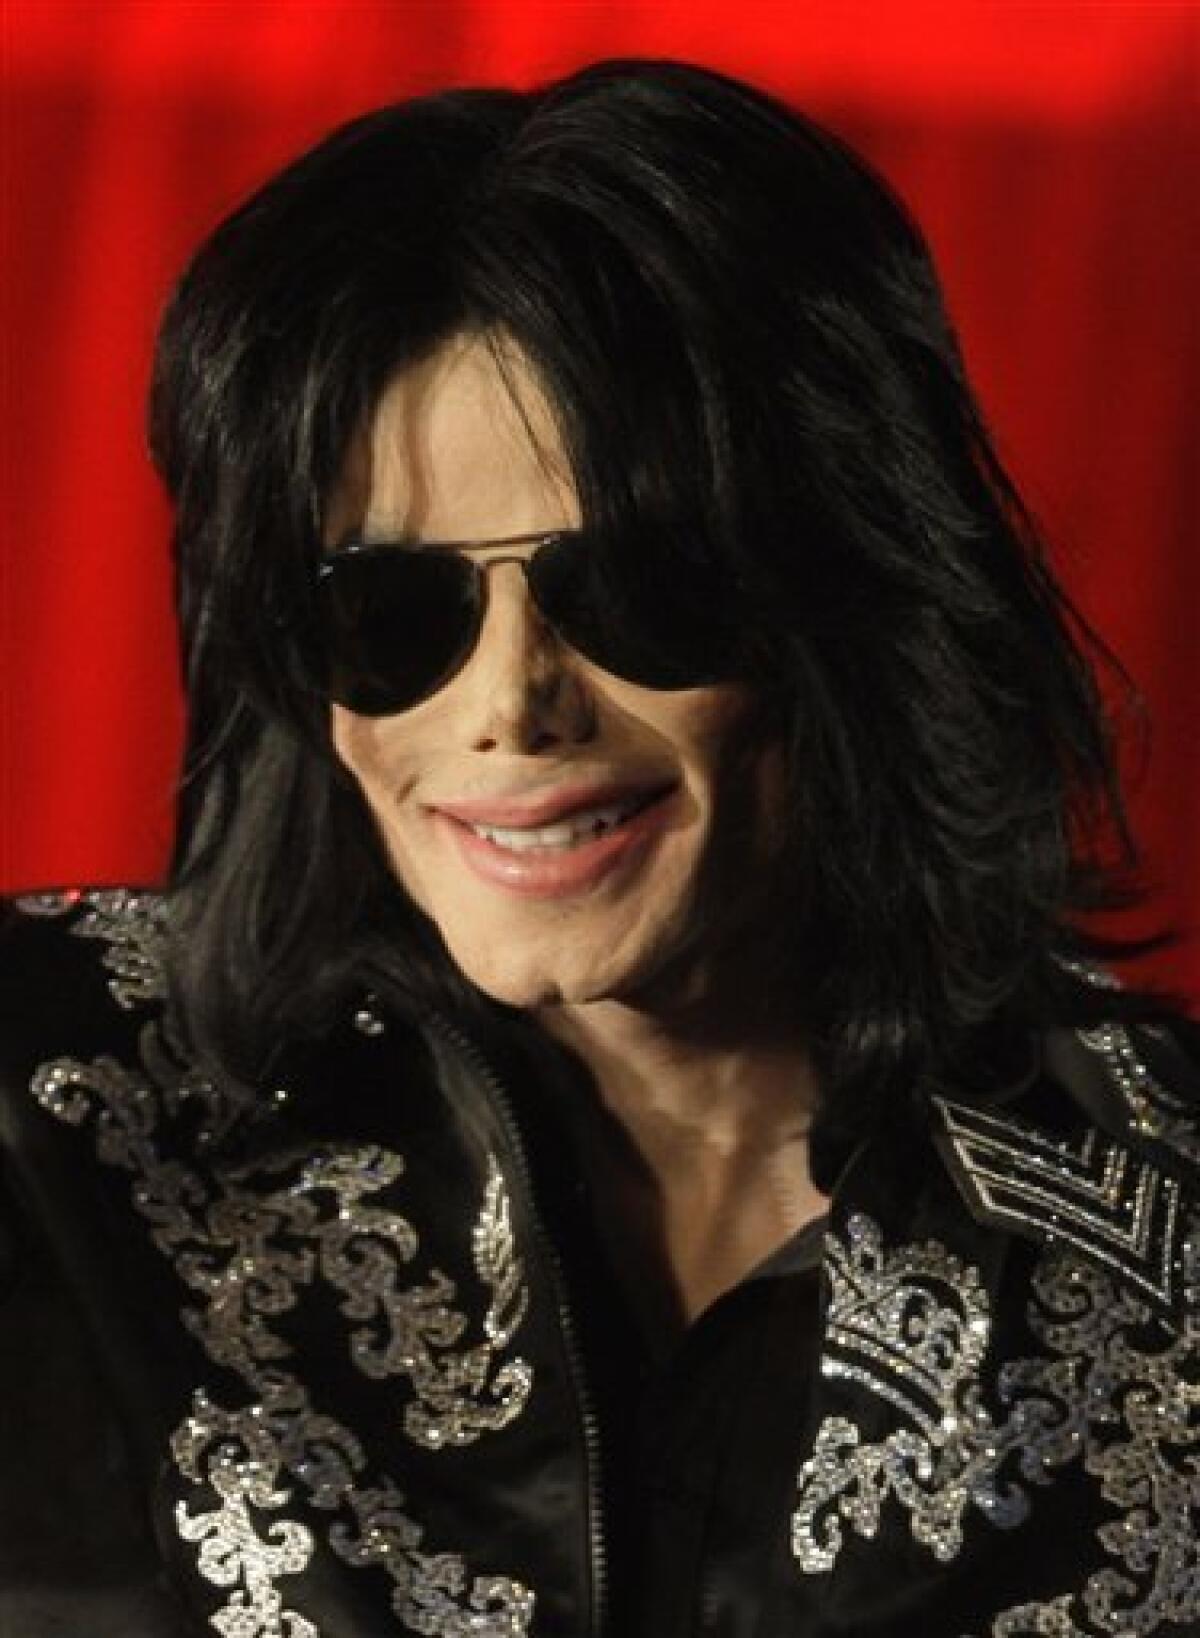 Michael Jackson: king of style - Los Angeles Times